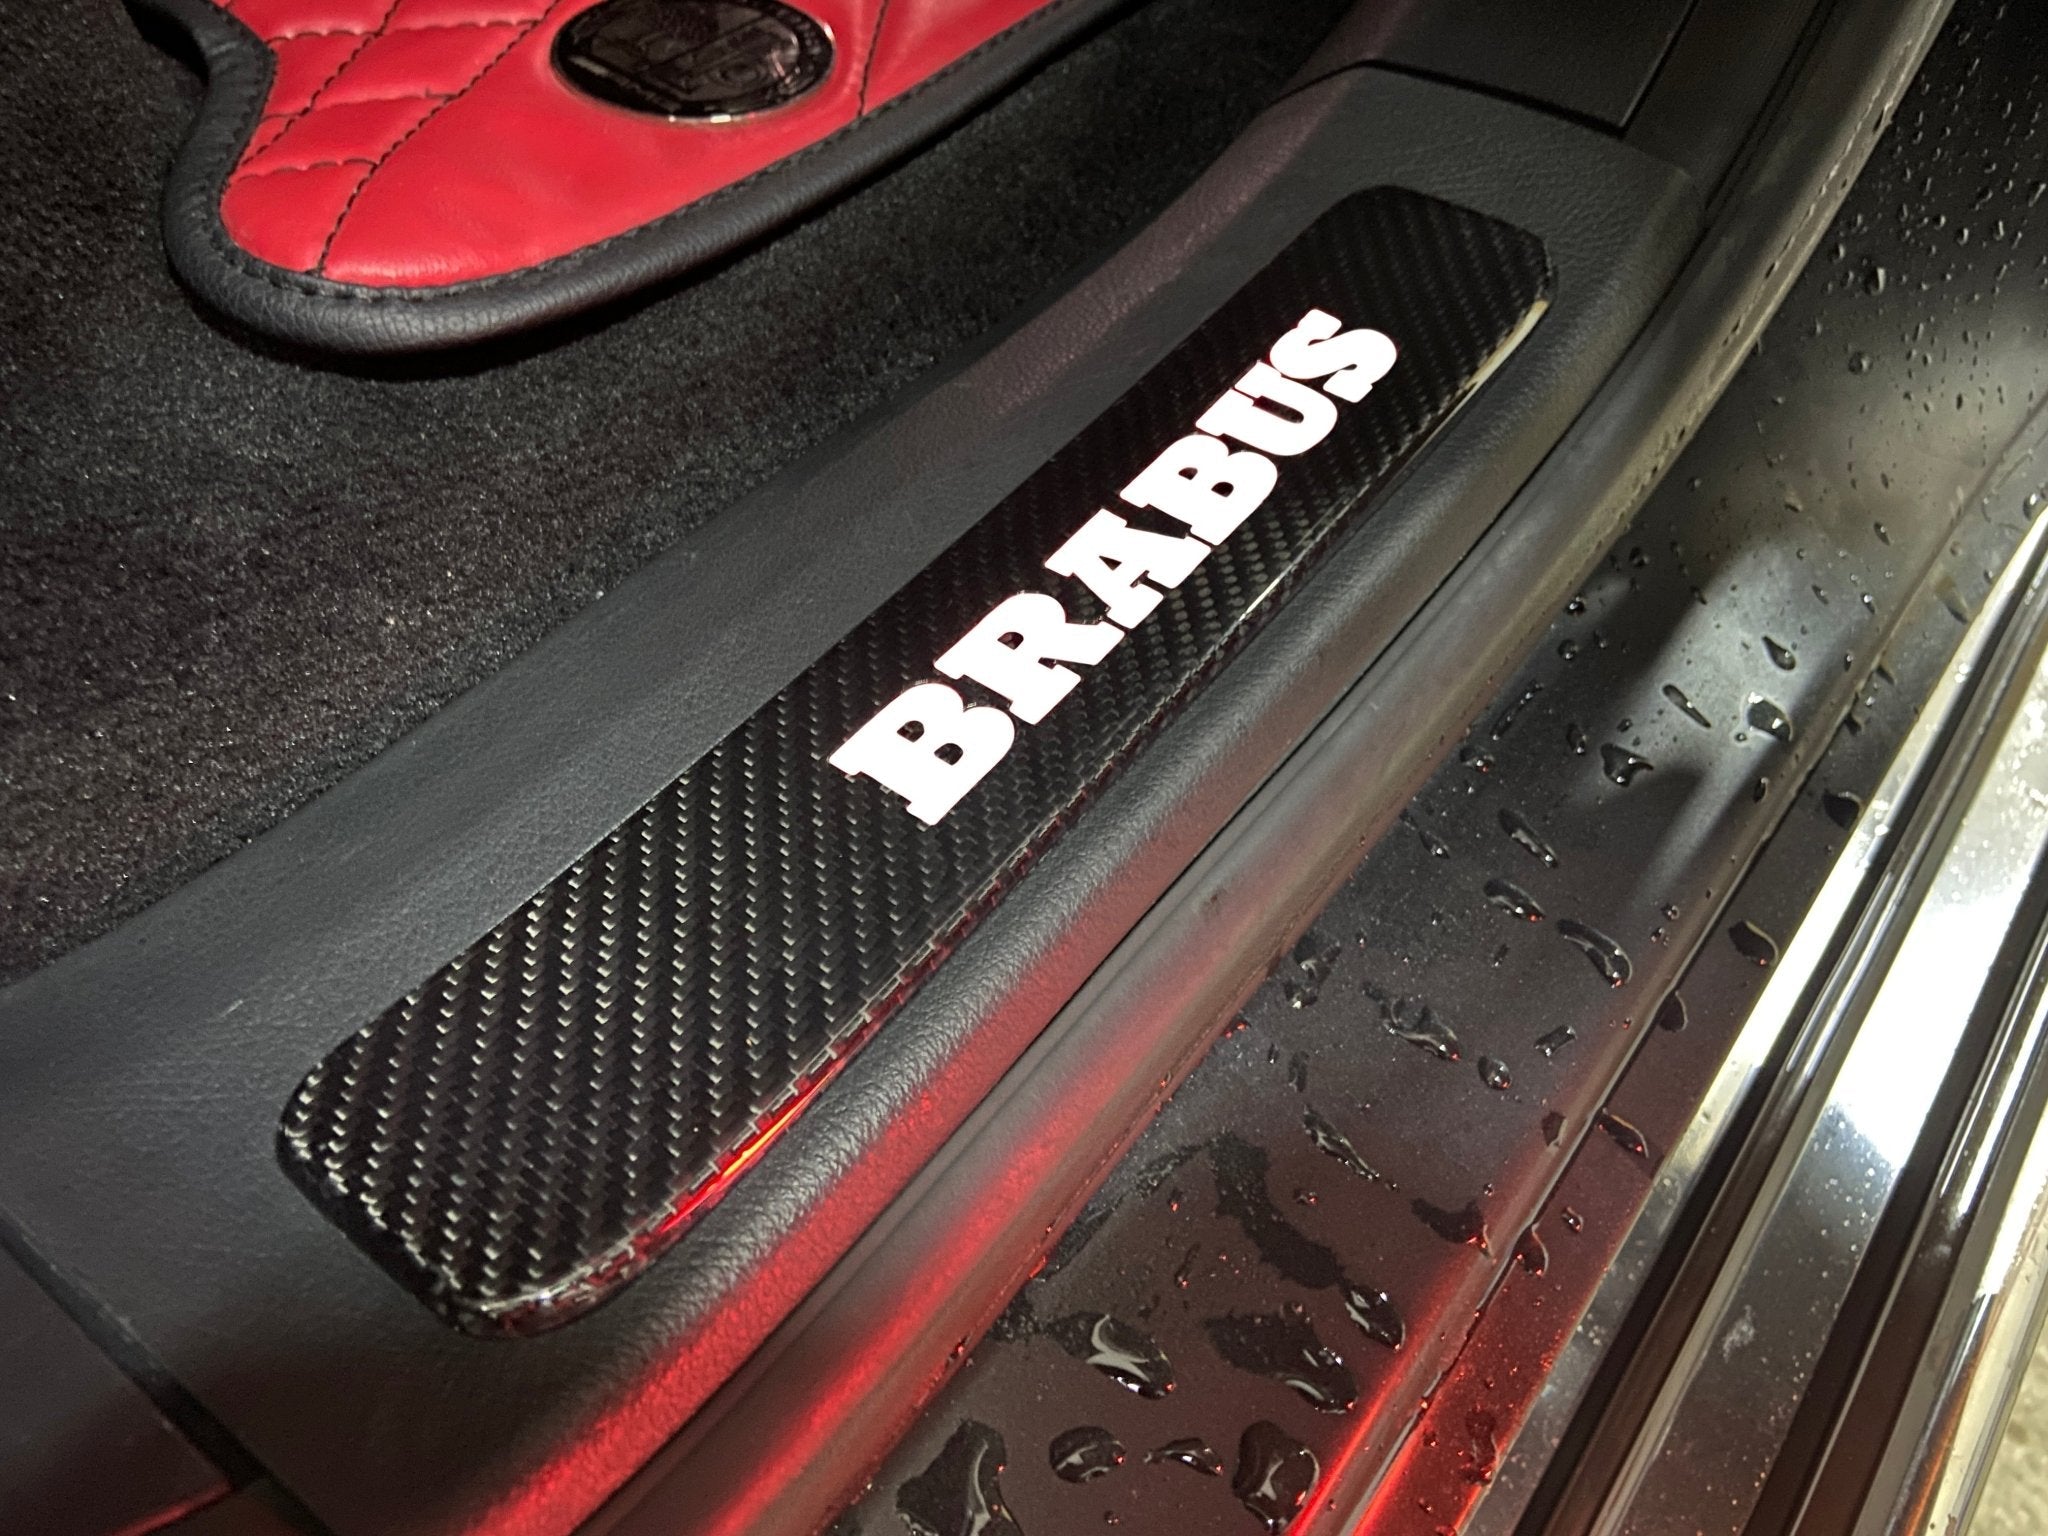 Brabus style Carbon Fiber Door Sills LED white illuminated for Mercedes-Benz w463a w464 G Wagon